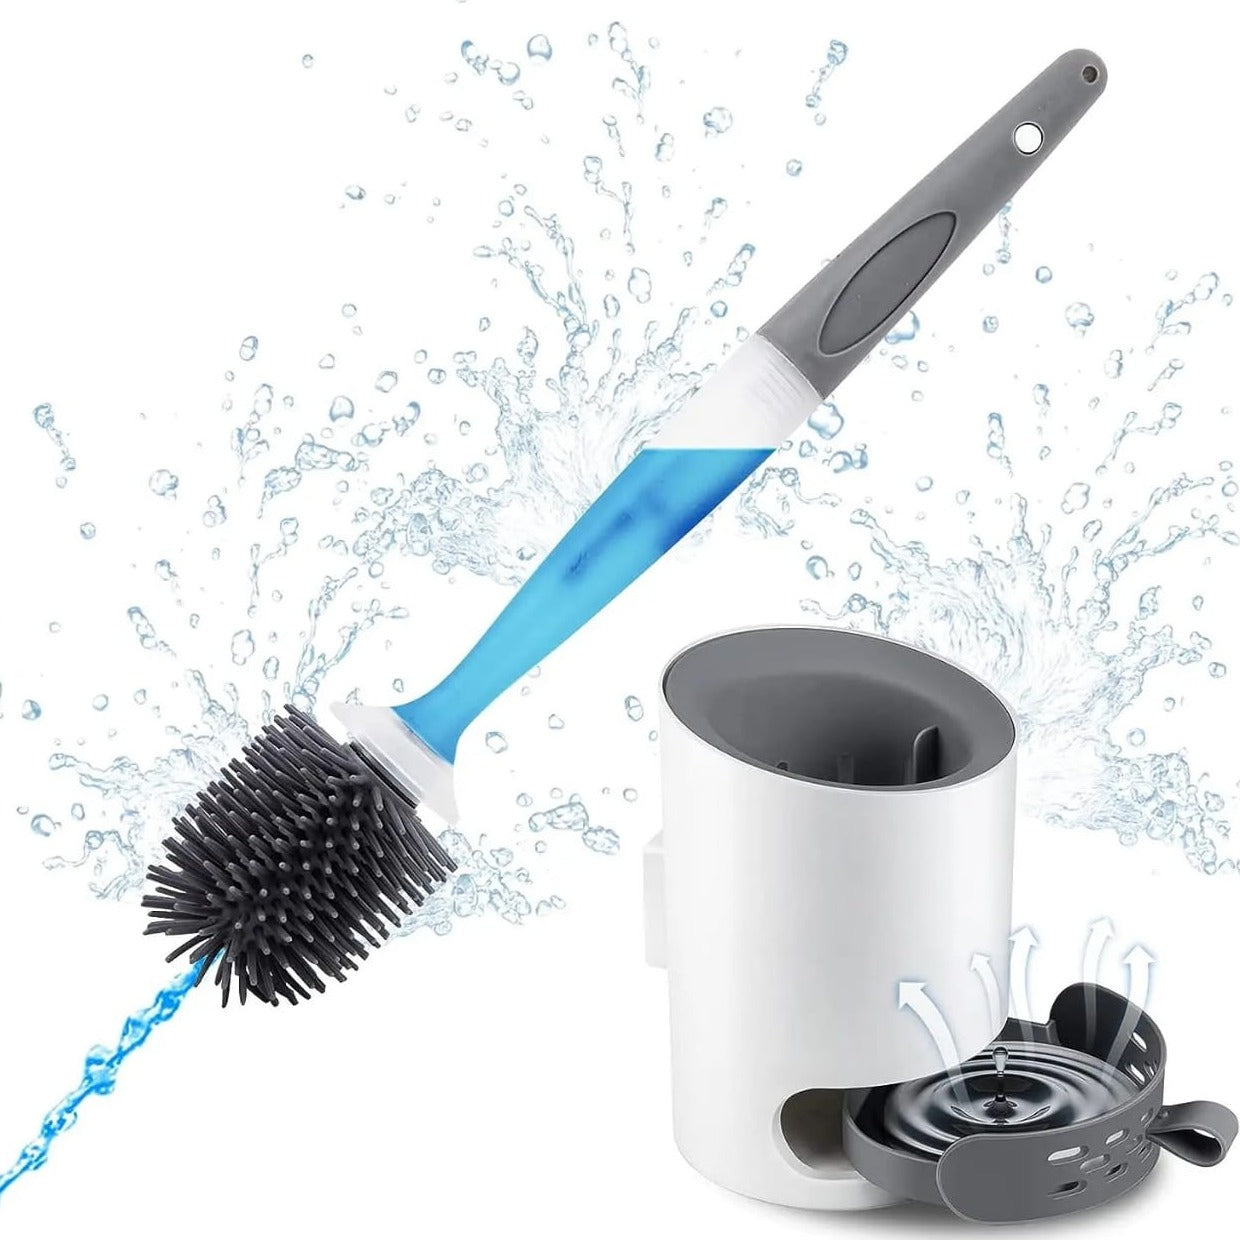 Detergent Refillable Toilet Cleaning Brush With Wall Mounted Holder.